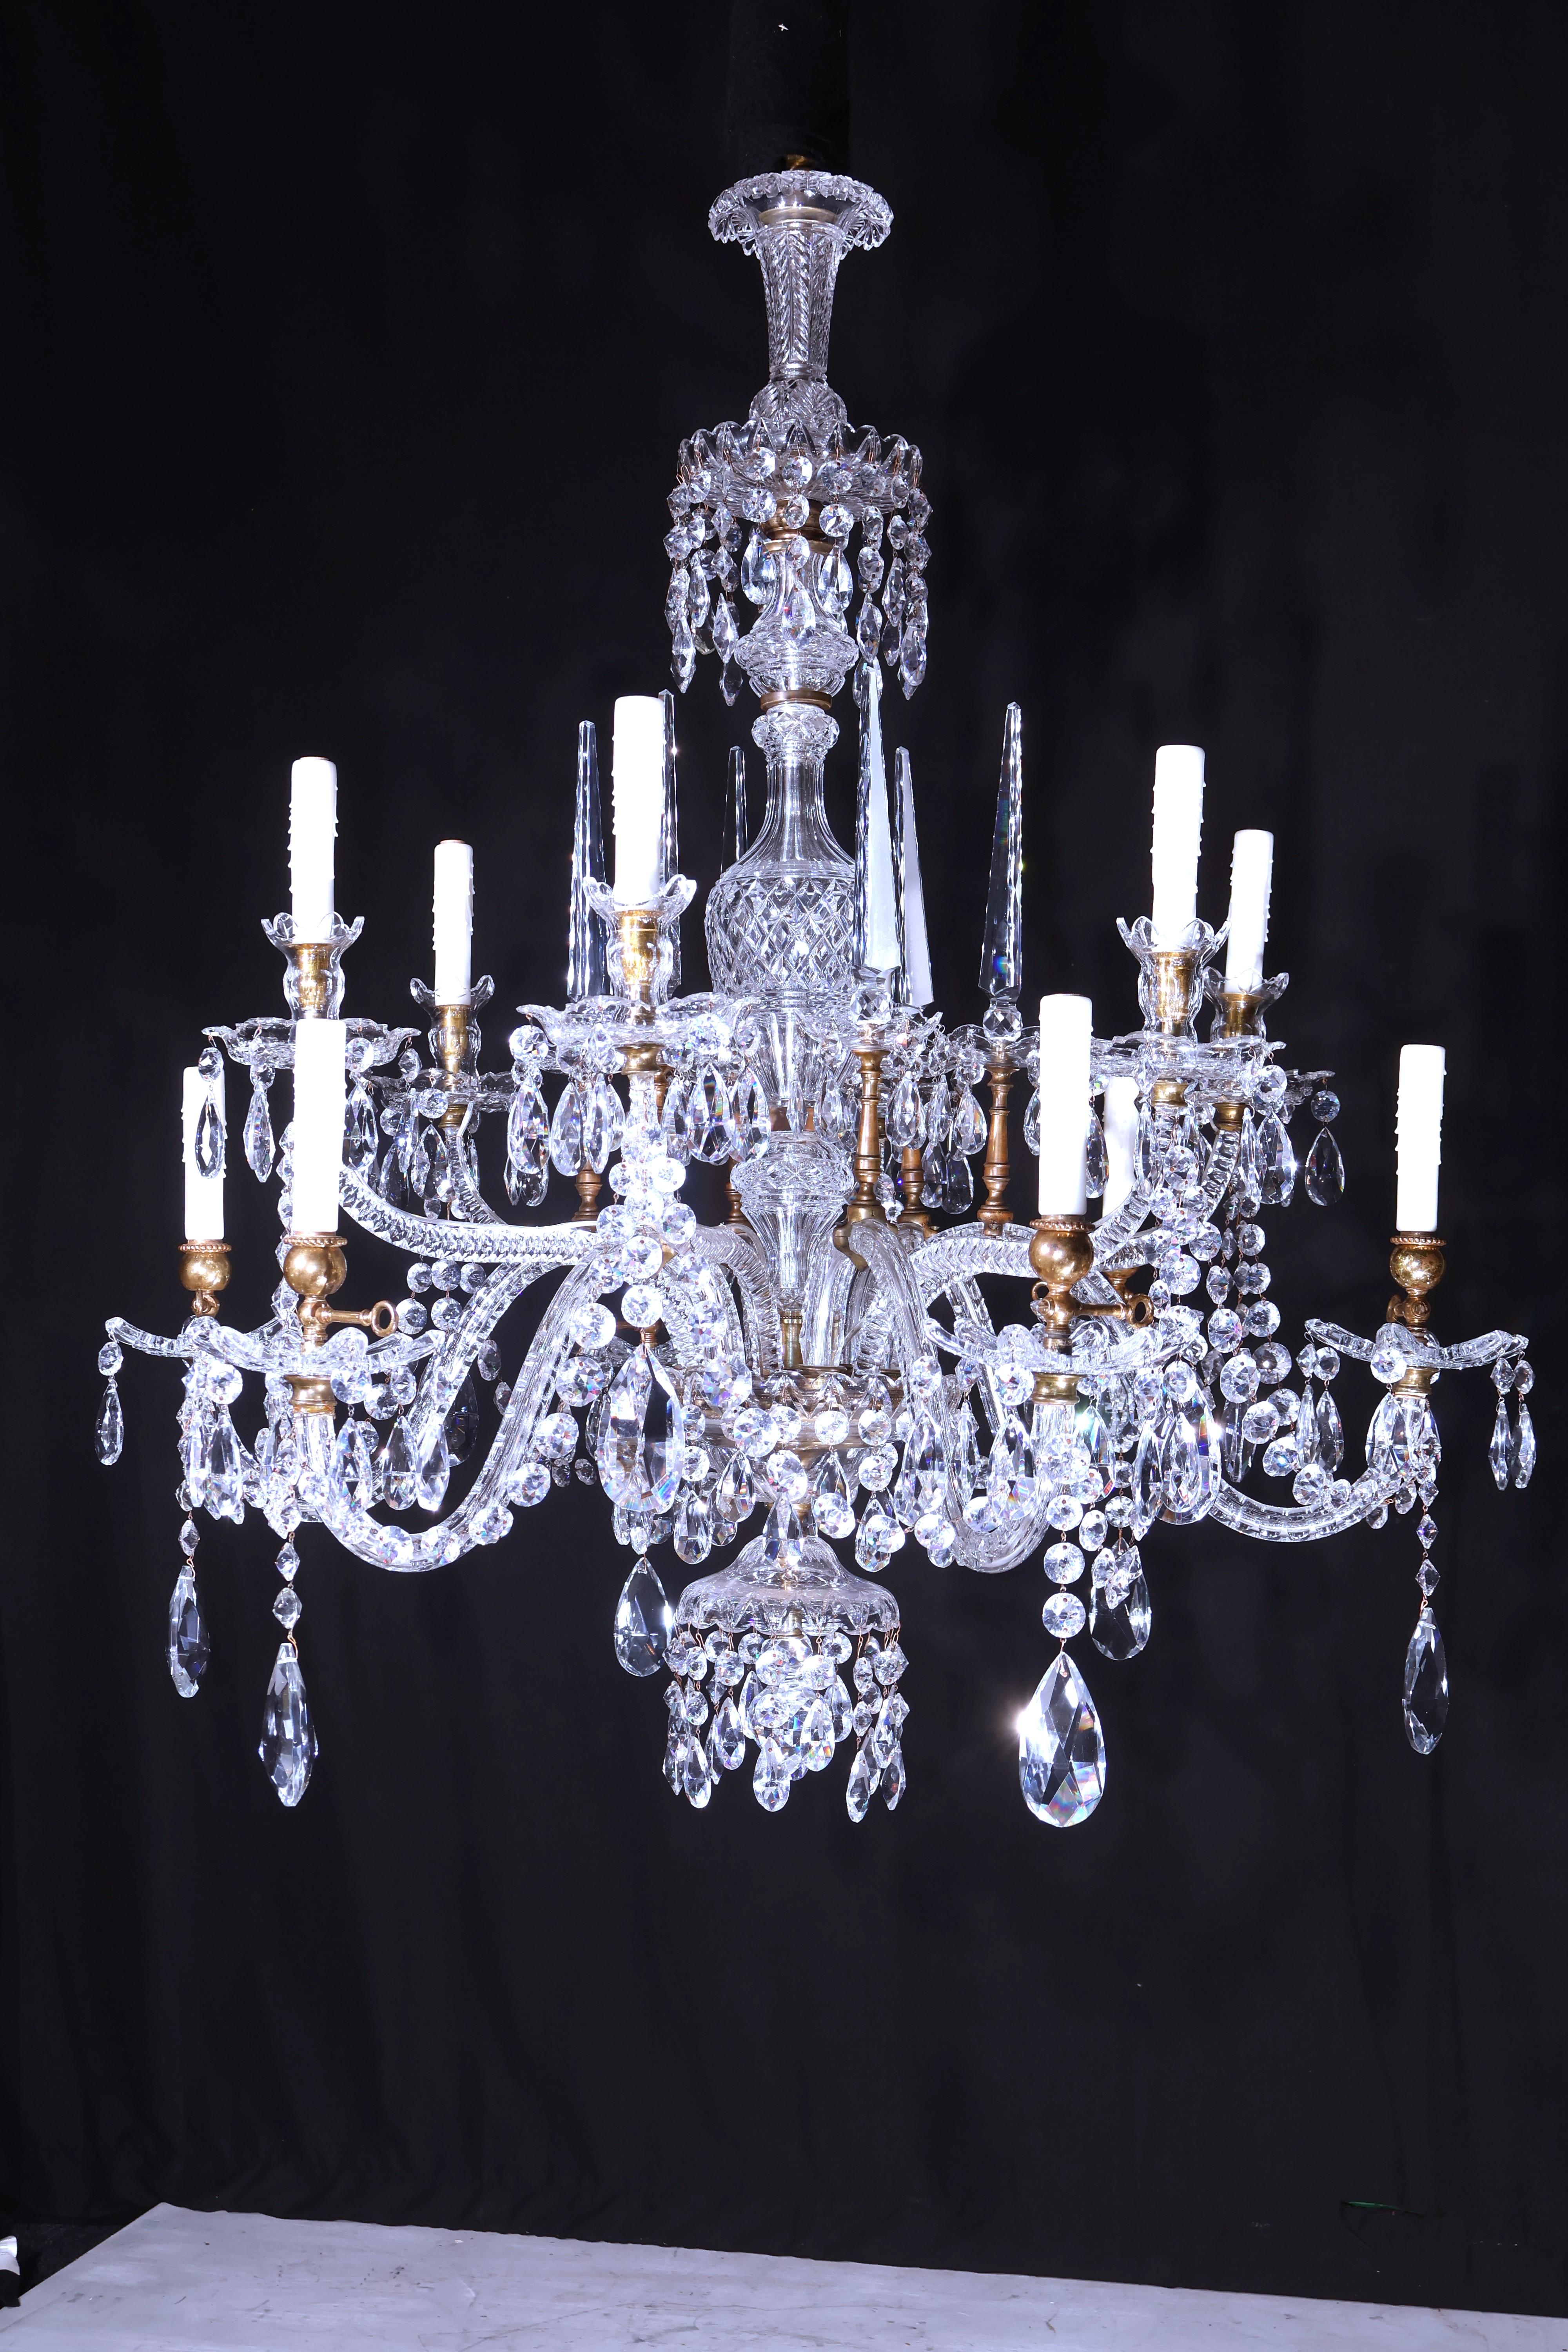 A Magnificent Bronze & Cut Crystal Chandelier, originally for gas and candles. Exquisite Quality. England, circa 1860. 12 lights. 
Dimensions: Height 48